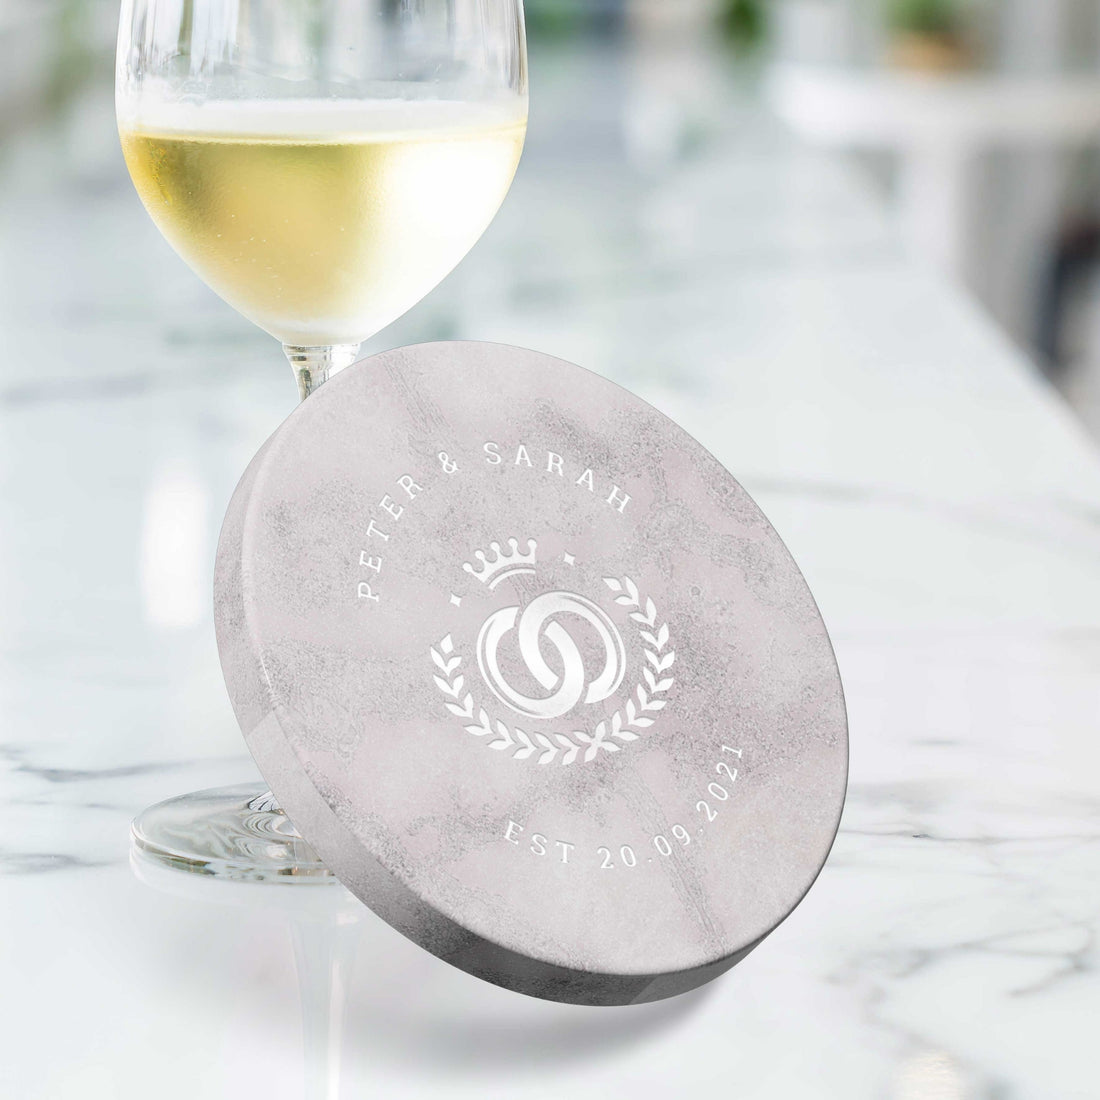 Custom Engraved Round Marble Coaster, Personalised Drink Mat, Wedding Favours/ Anniversary / Housewarming/ Birthday/Teacher/ Corporate Gift